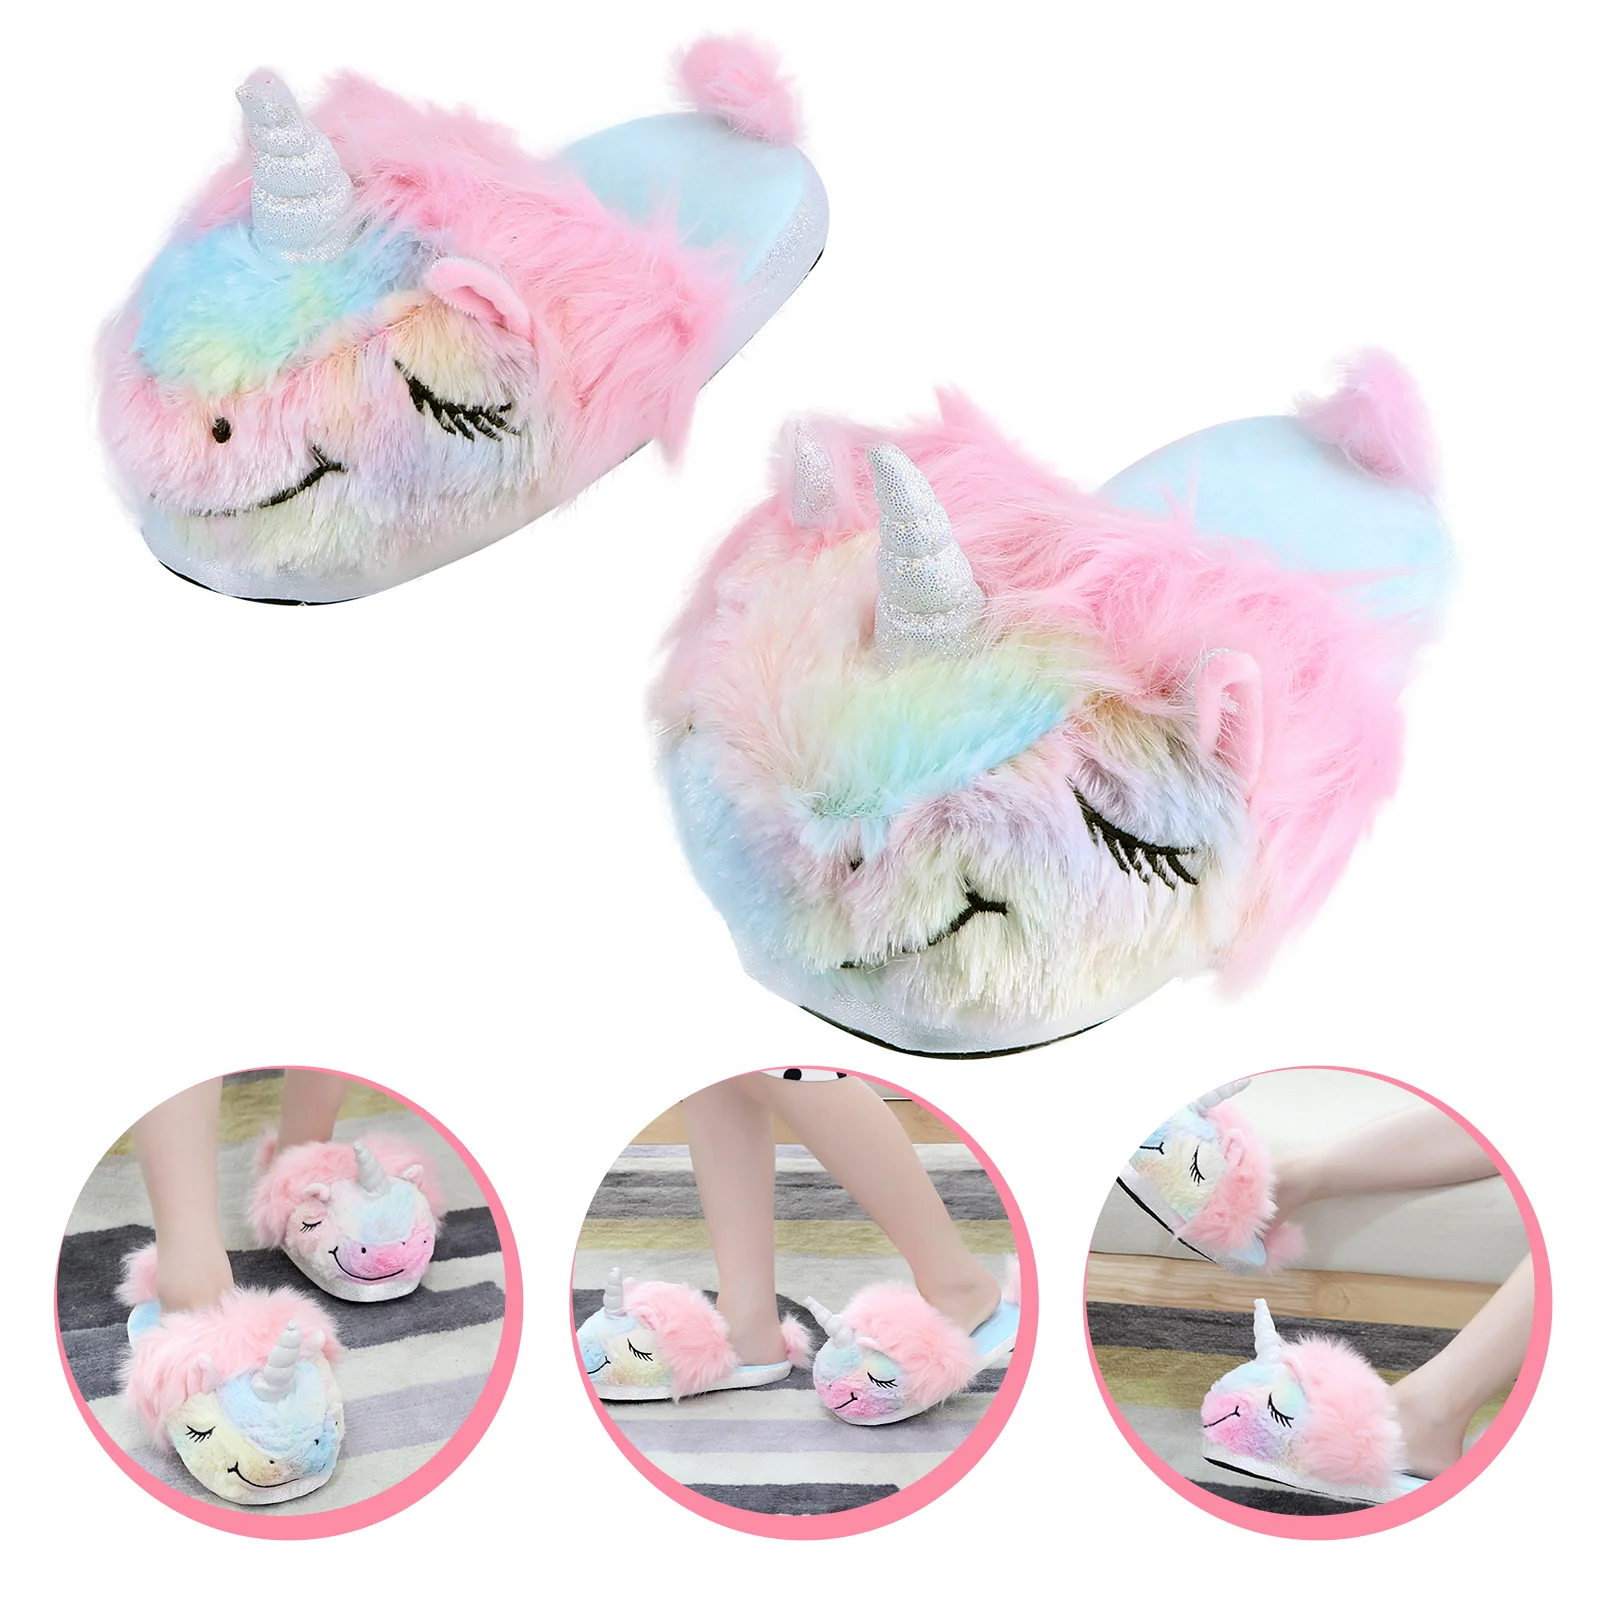 Unicorn Slippers Bedroom Shoes Home Ladies Keep Warm Sippers for Woman Cotton Plush Indoor Animal